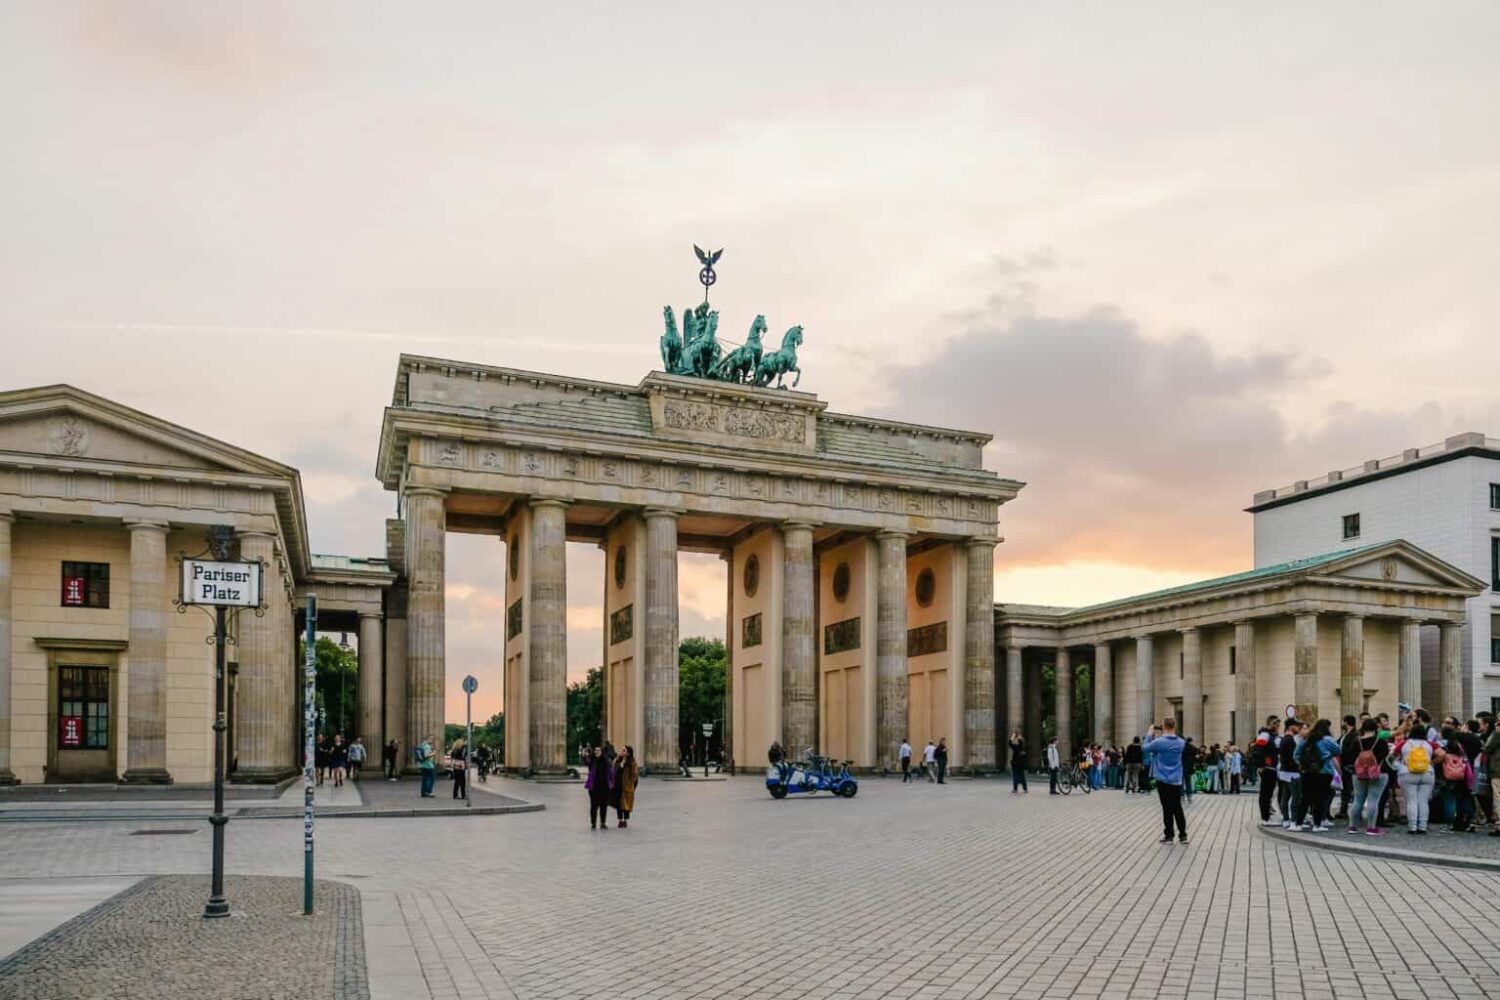 Visitors anticipates the review of Germany visa application